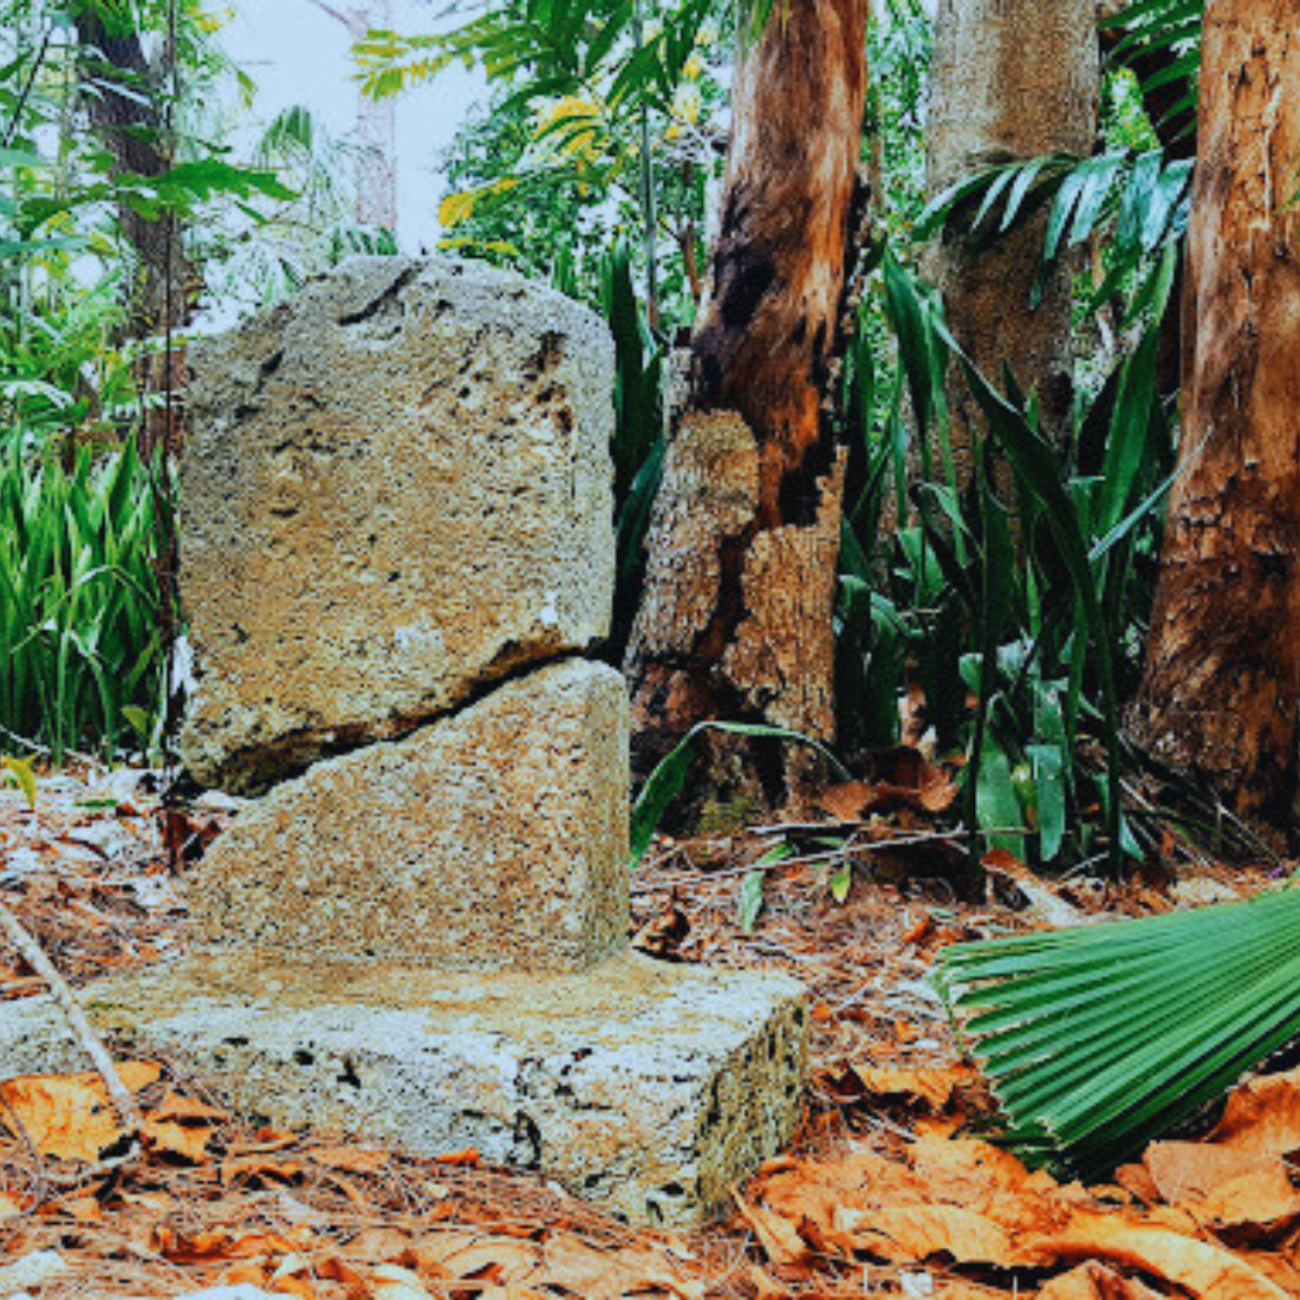 A very old gravestone, remains standing despite deep cracks. Tropical trees and greenery surround.